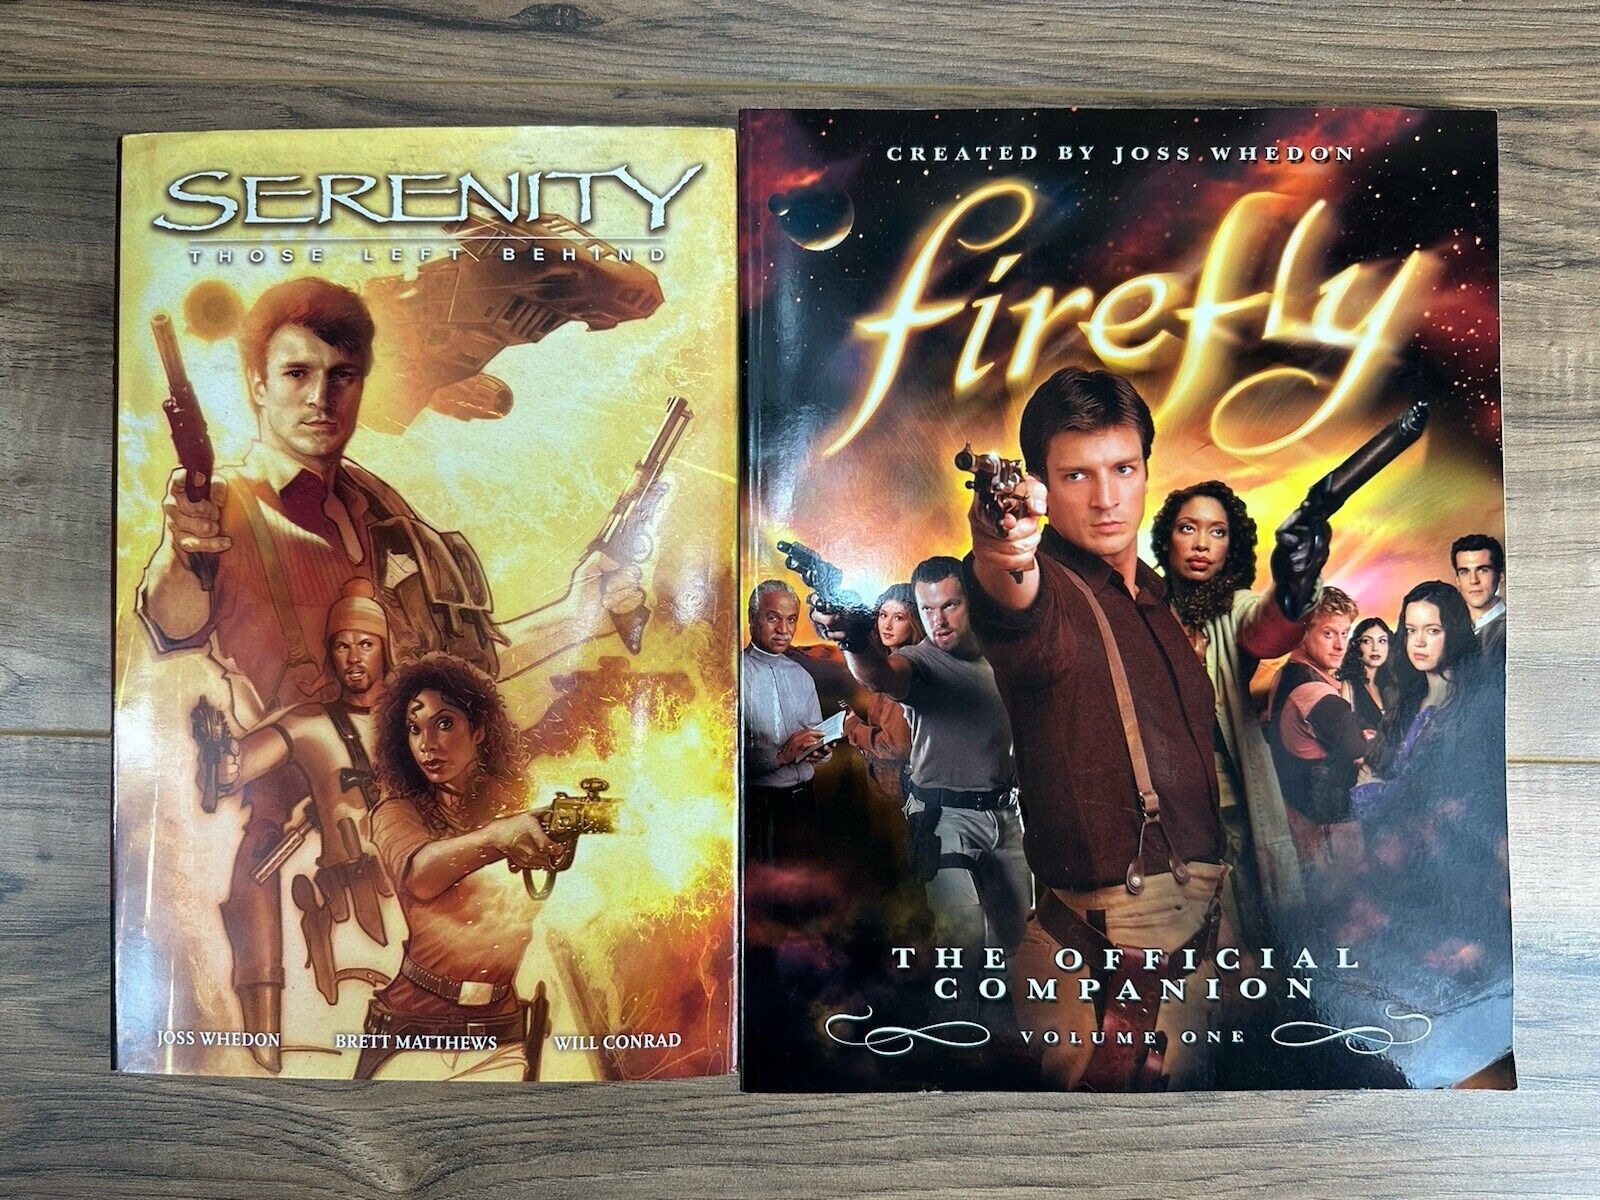 Serenity: Those Left Behind 2007 Hardcover and The Official Companion Lot of 2